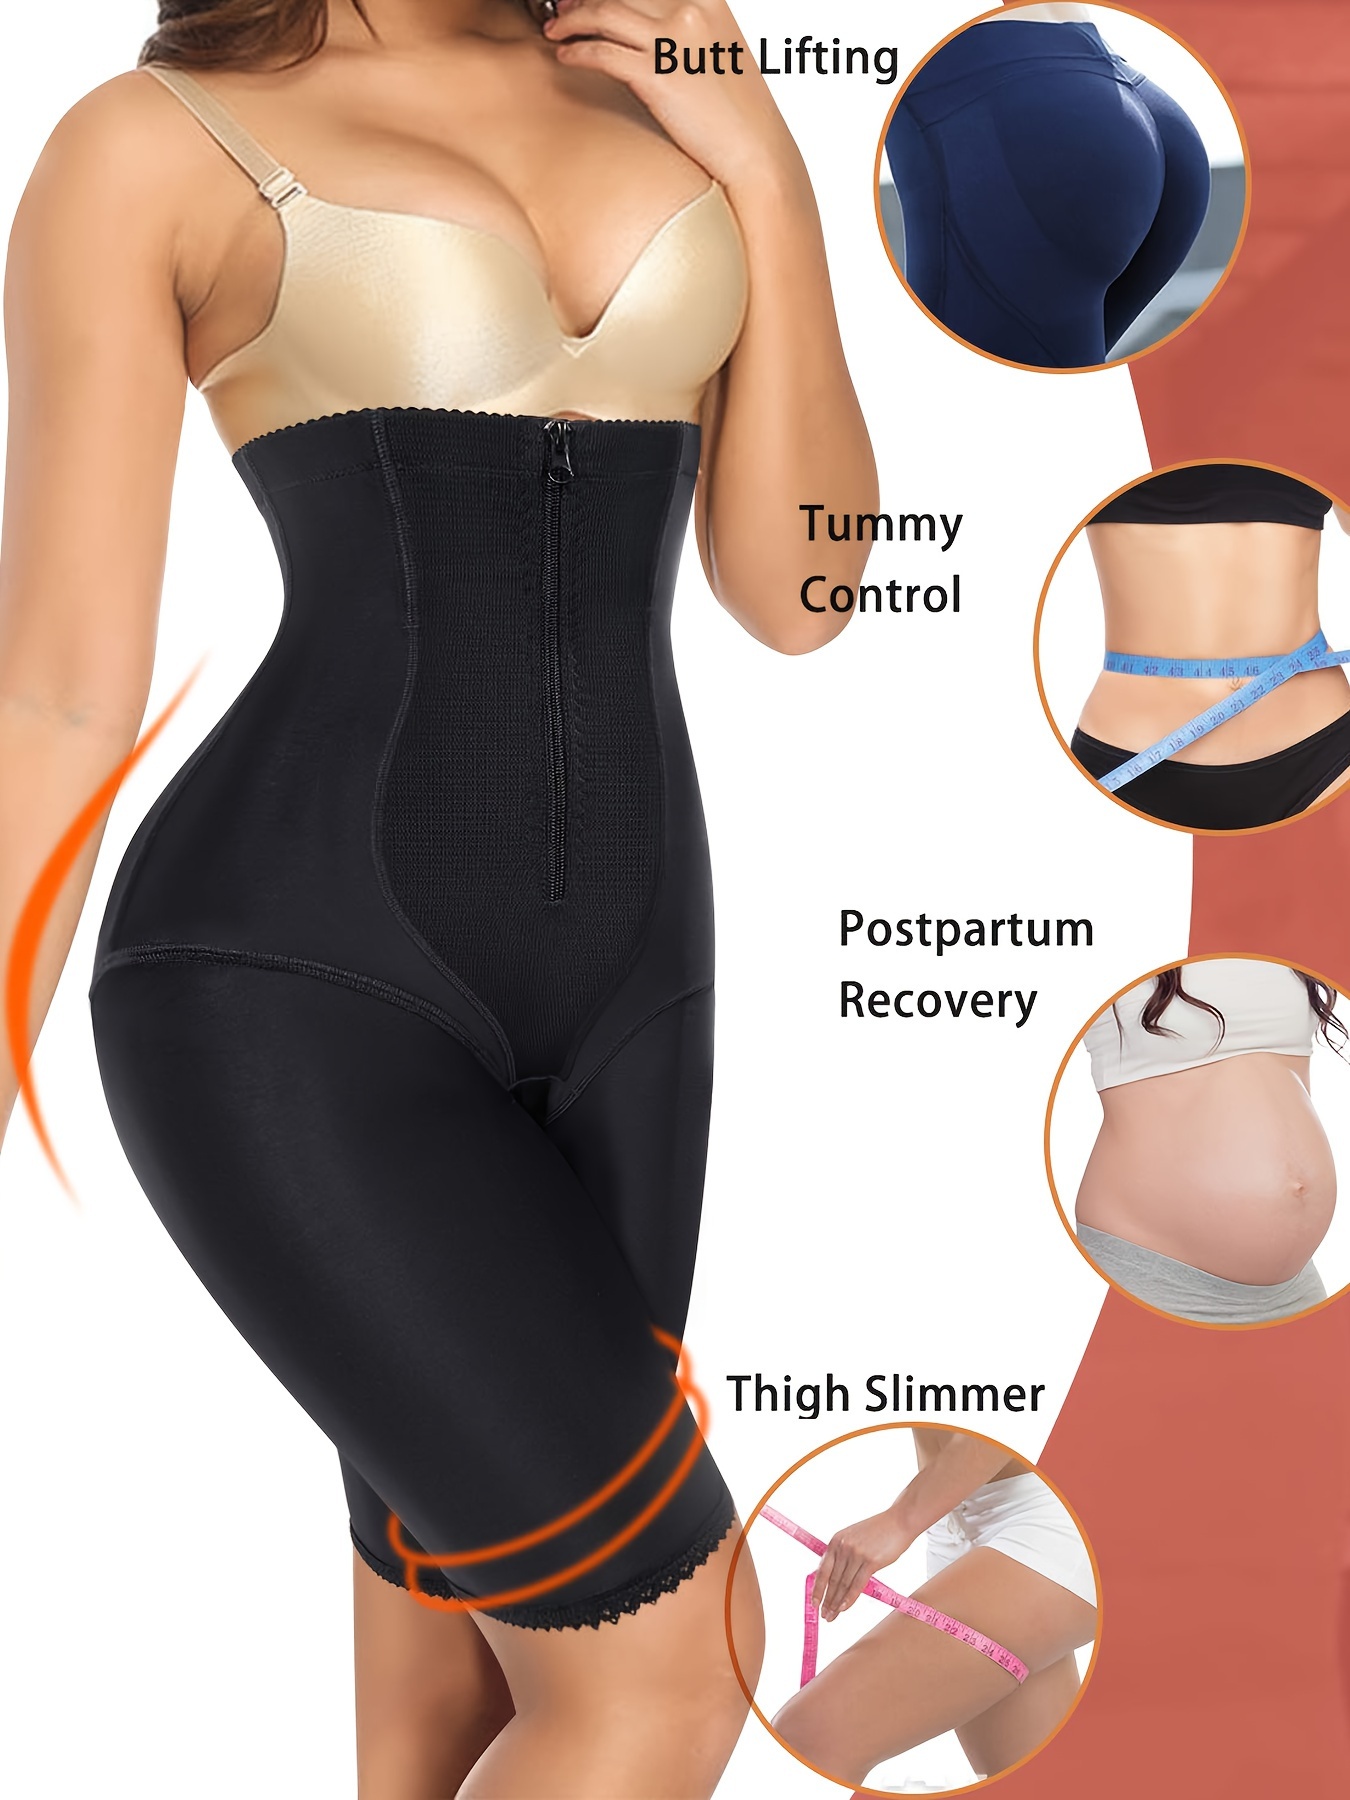 Compression Postpartum Recovery Girdle Shaper Shorts High Waist